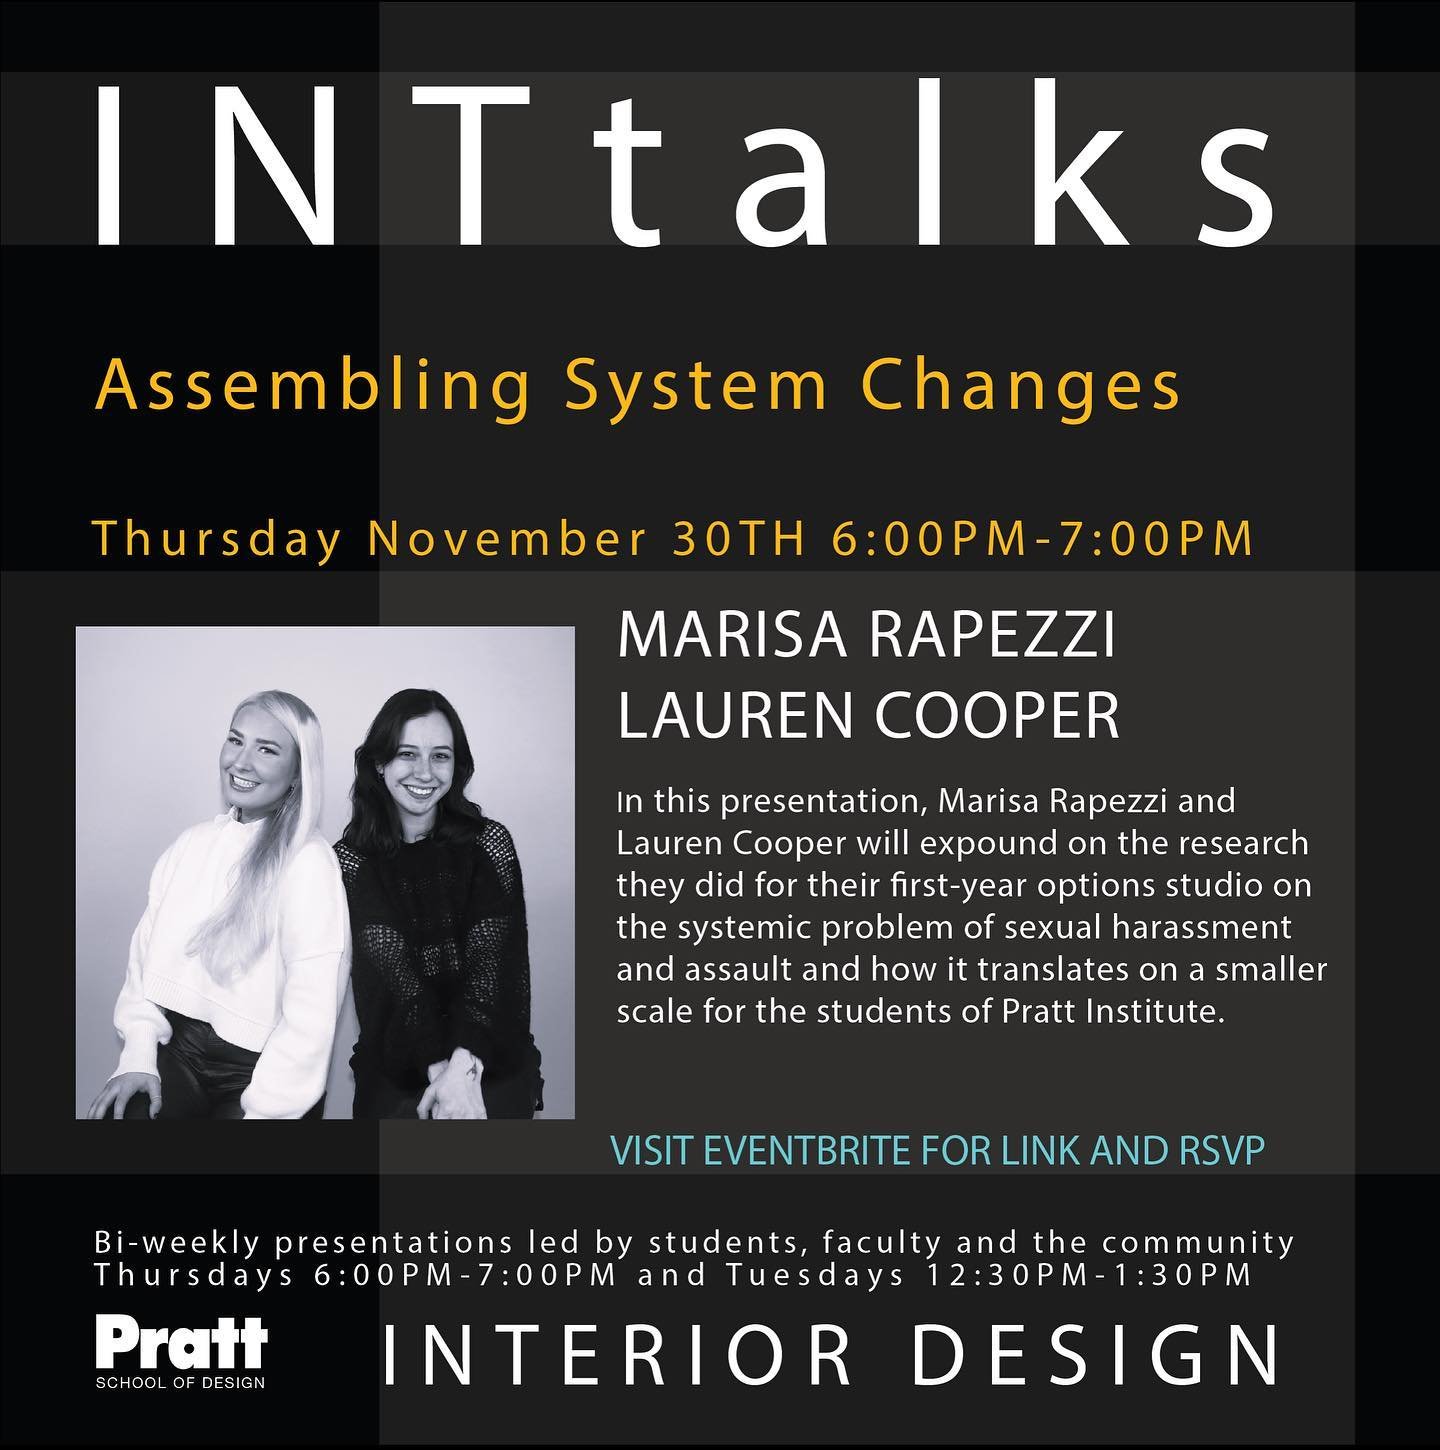 Very excited to share that Lauren and I will be giving a talk put on by the Pratt Interior Design Department. This is a very exciting moment in both our academic careers, as we are both set to  graduate this spring! 
The event is free and being held 